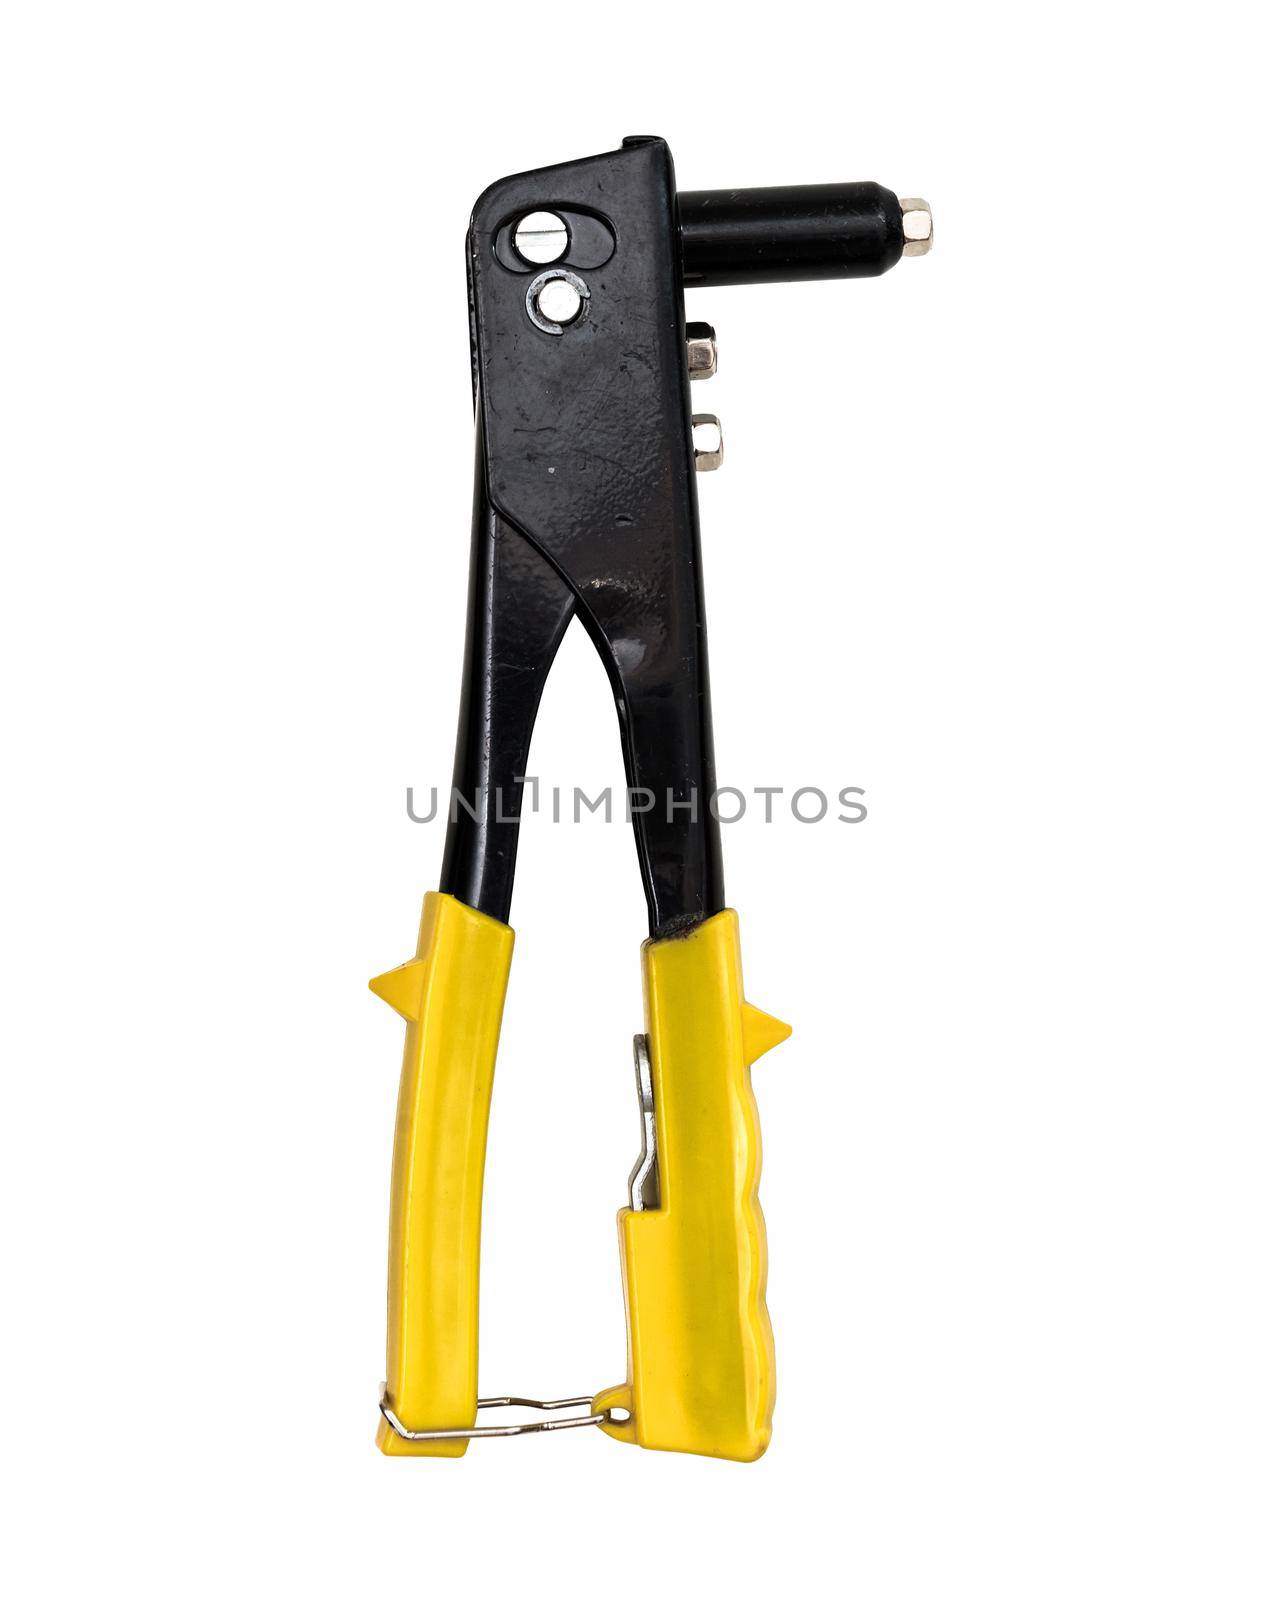 rivet pliers on white background